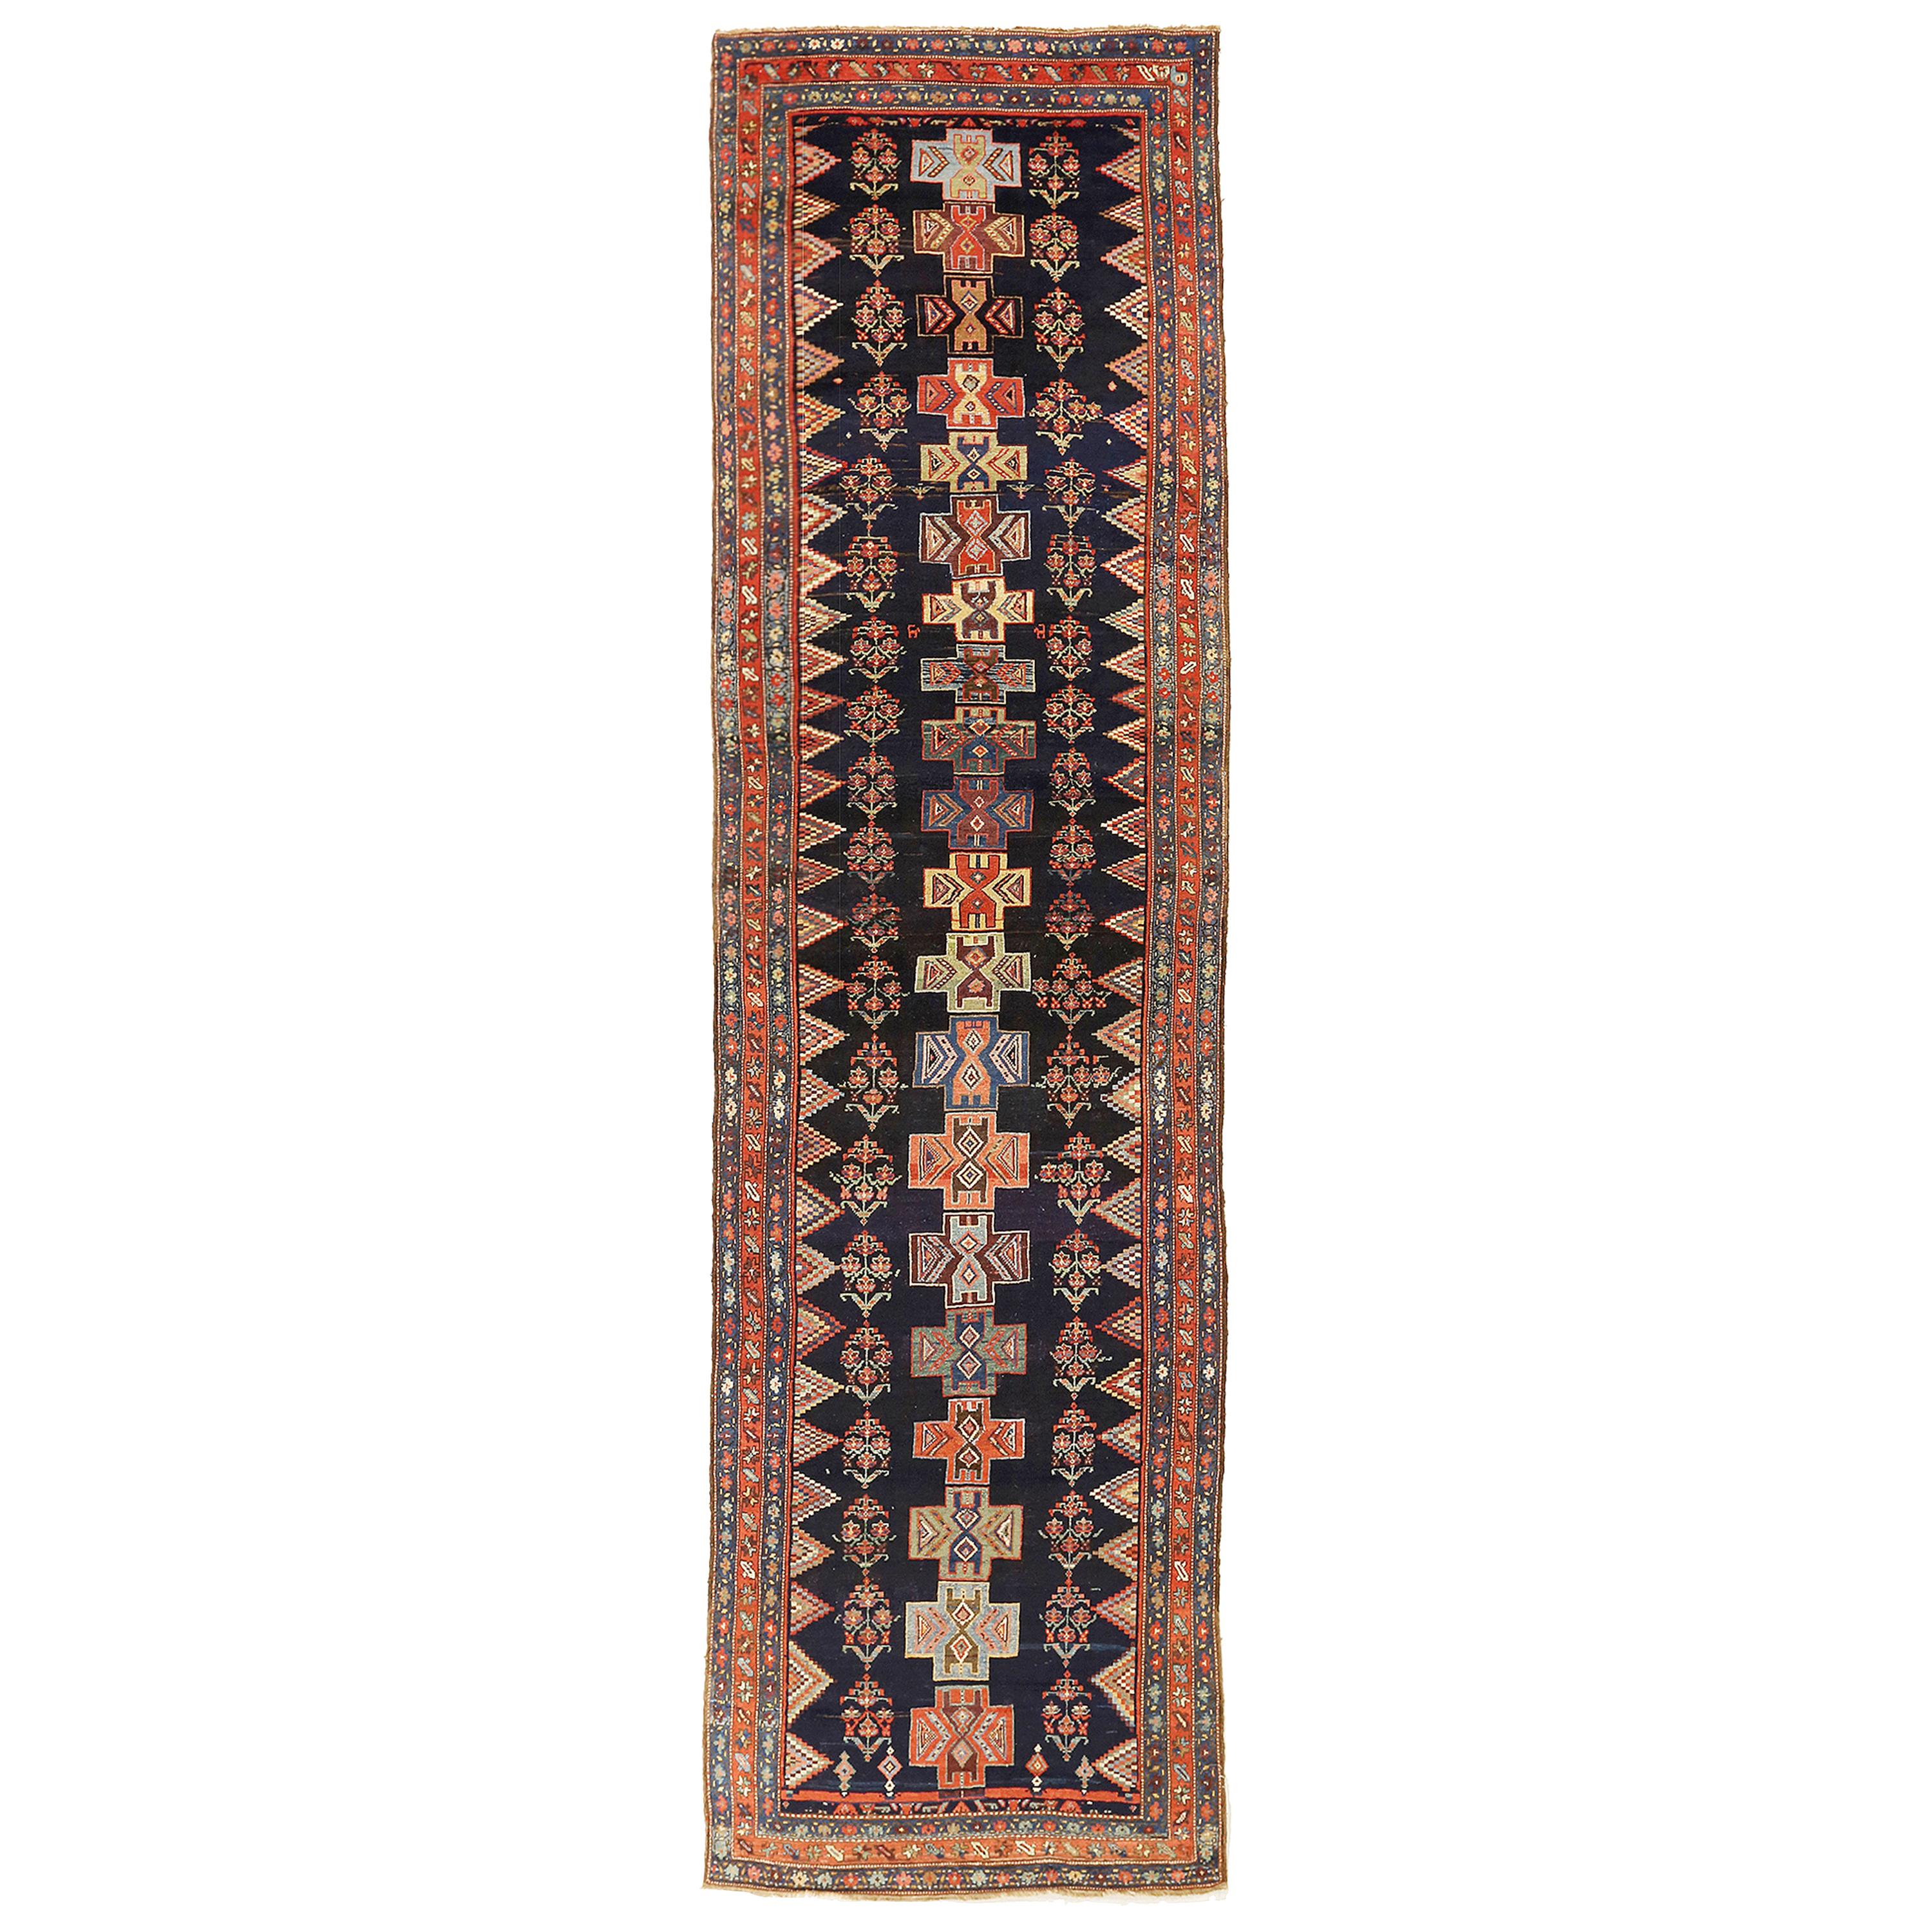 Antique Persian Bijar Runner Rug with Colored Cross and Flower Medallions